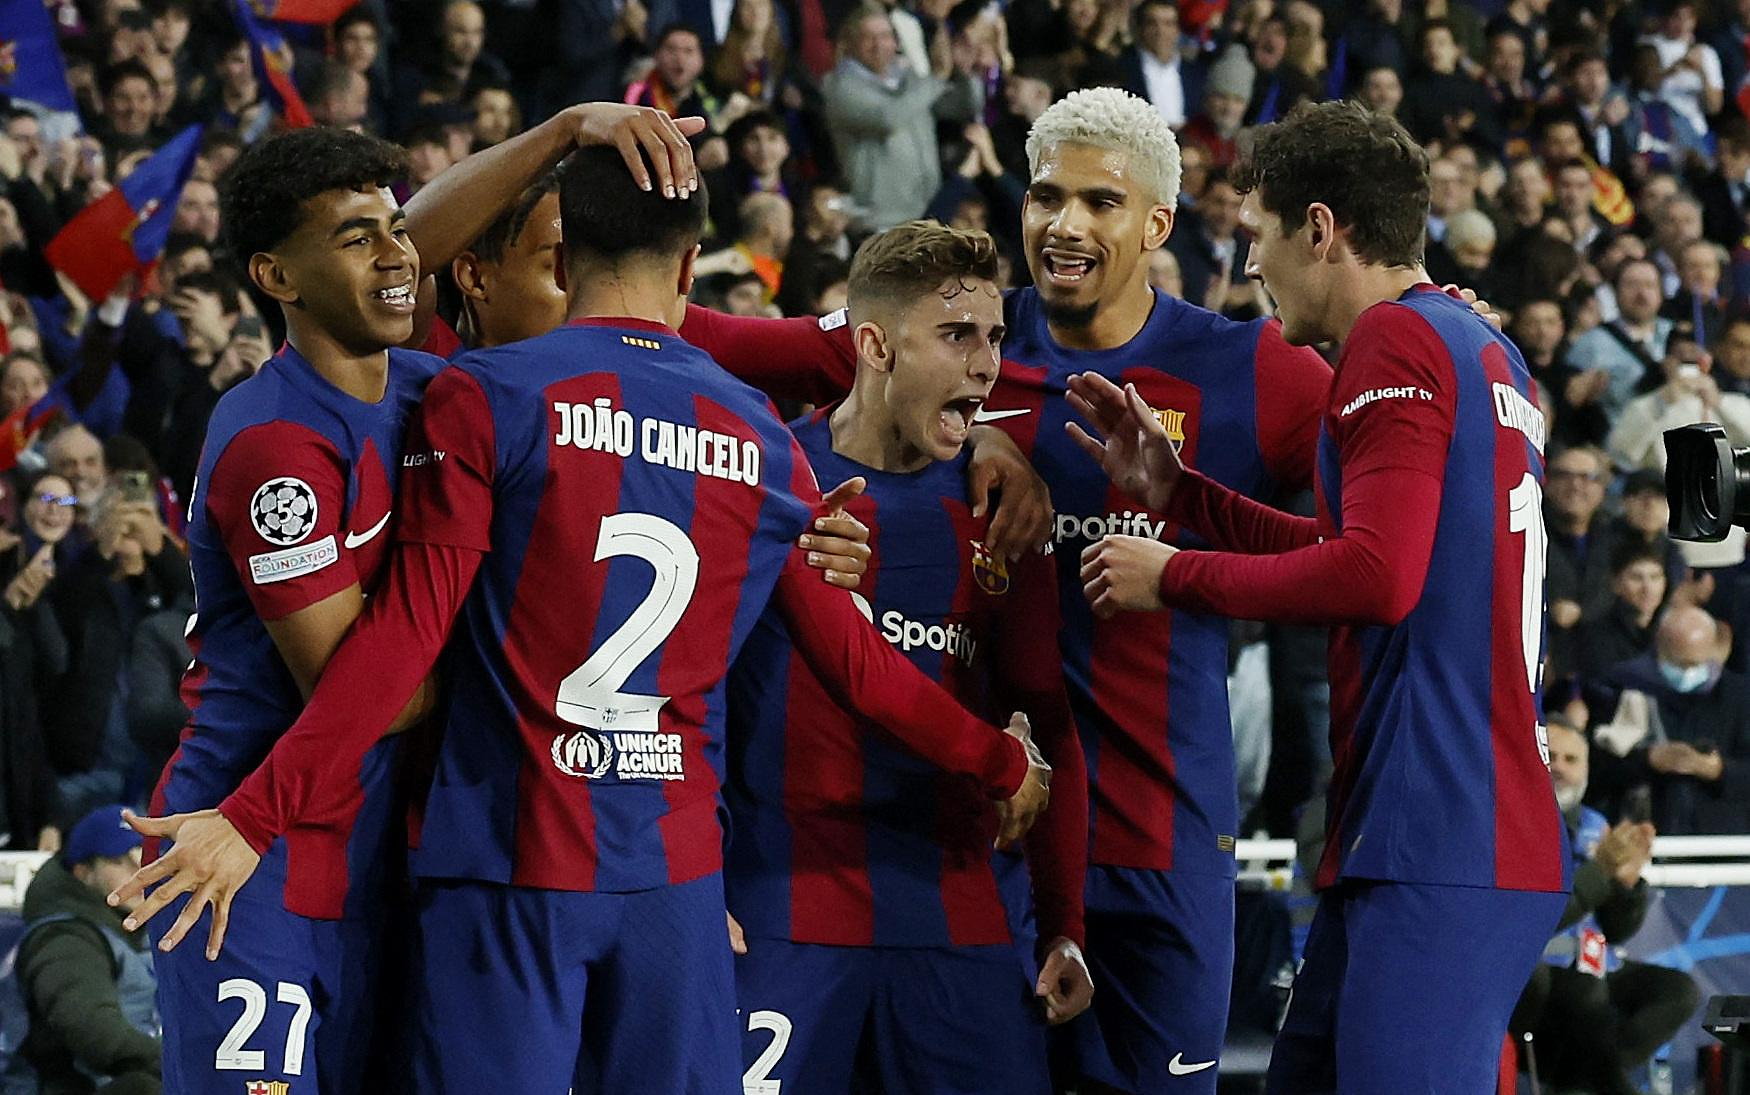 Champions League: in pain, Barça dismisses Naples and climbs into the quarters